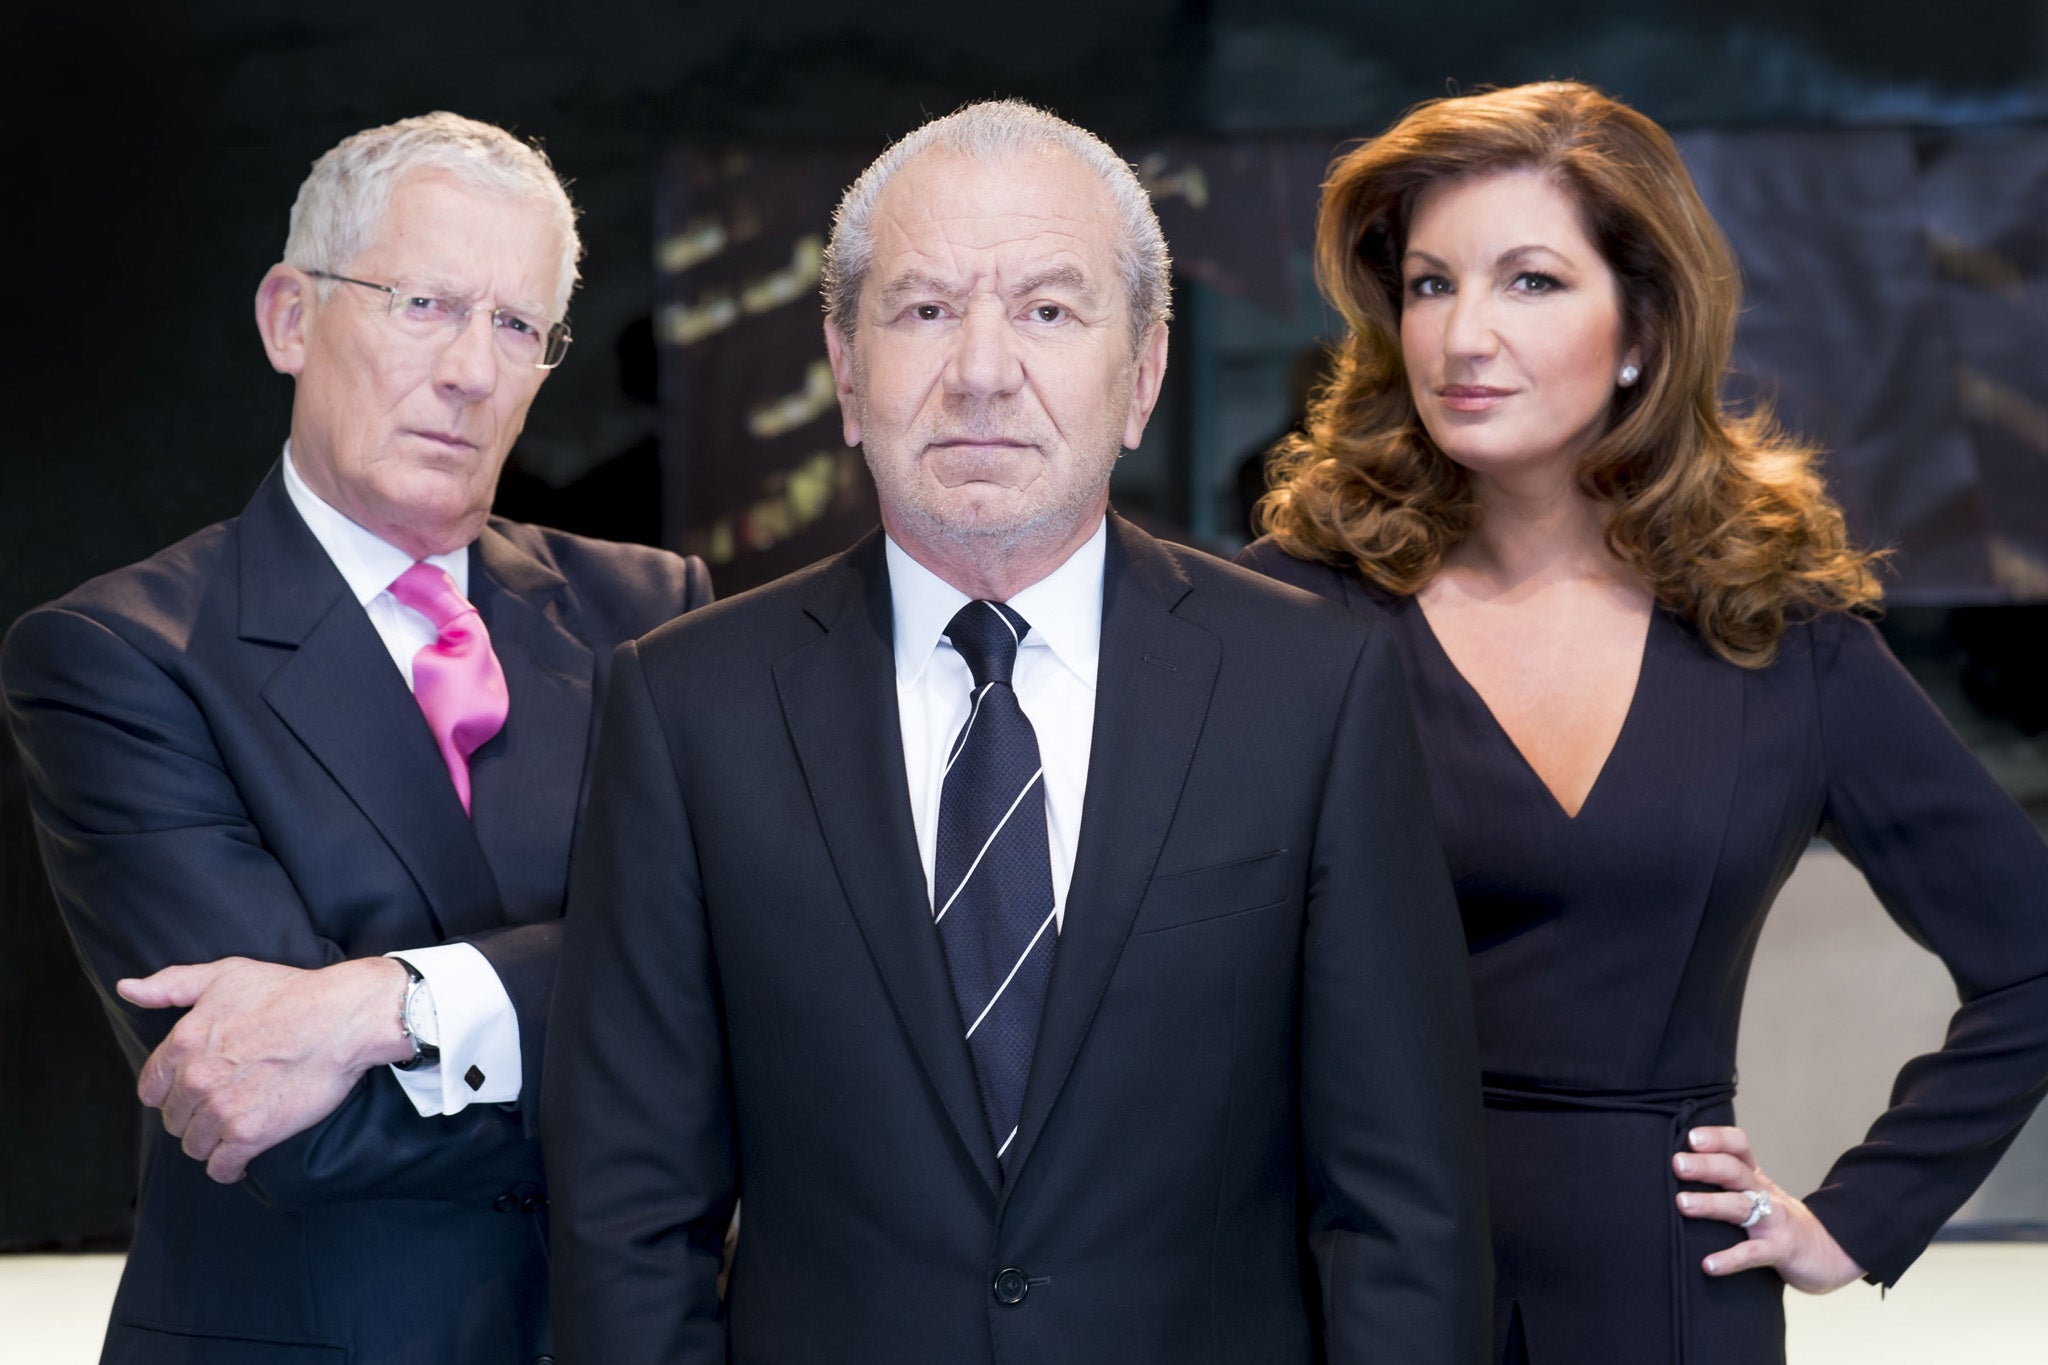 Nick Hewer, left, said Lord Alan Sugar, centre, could soon quit The Apprentice